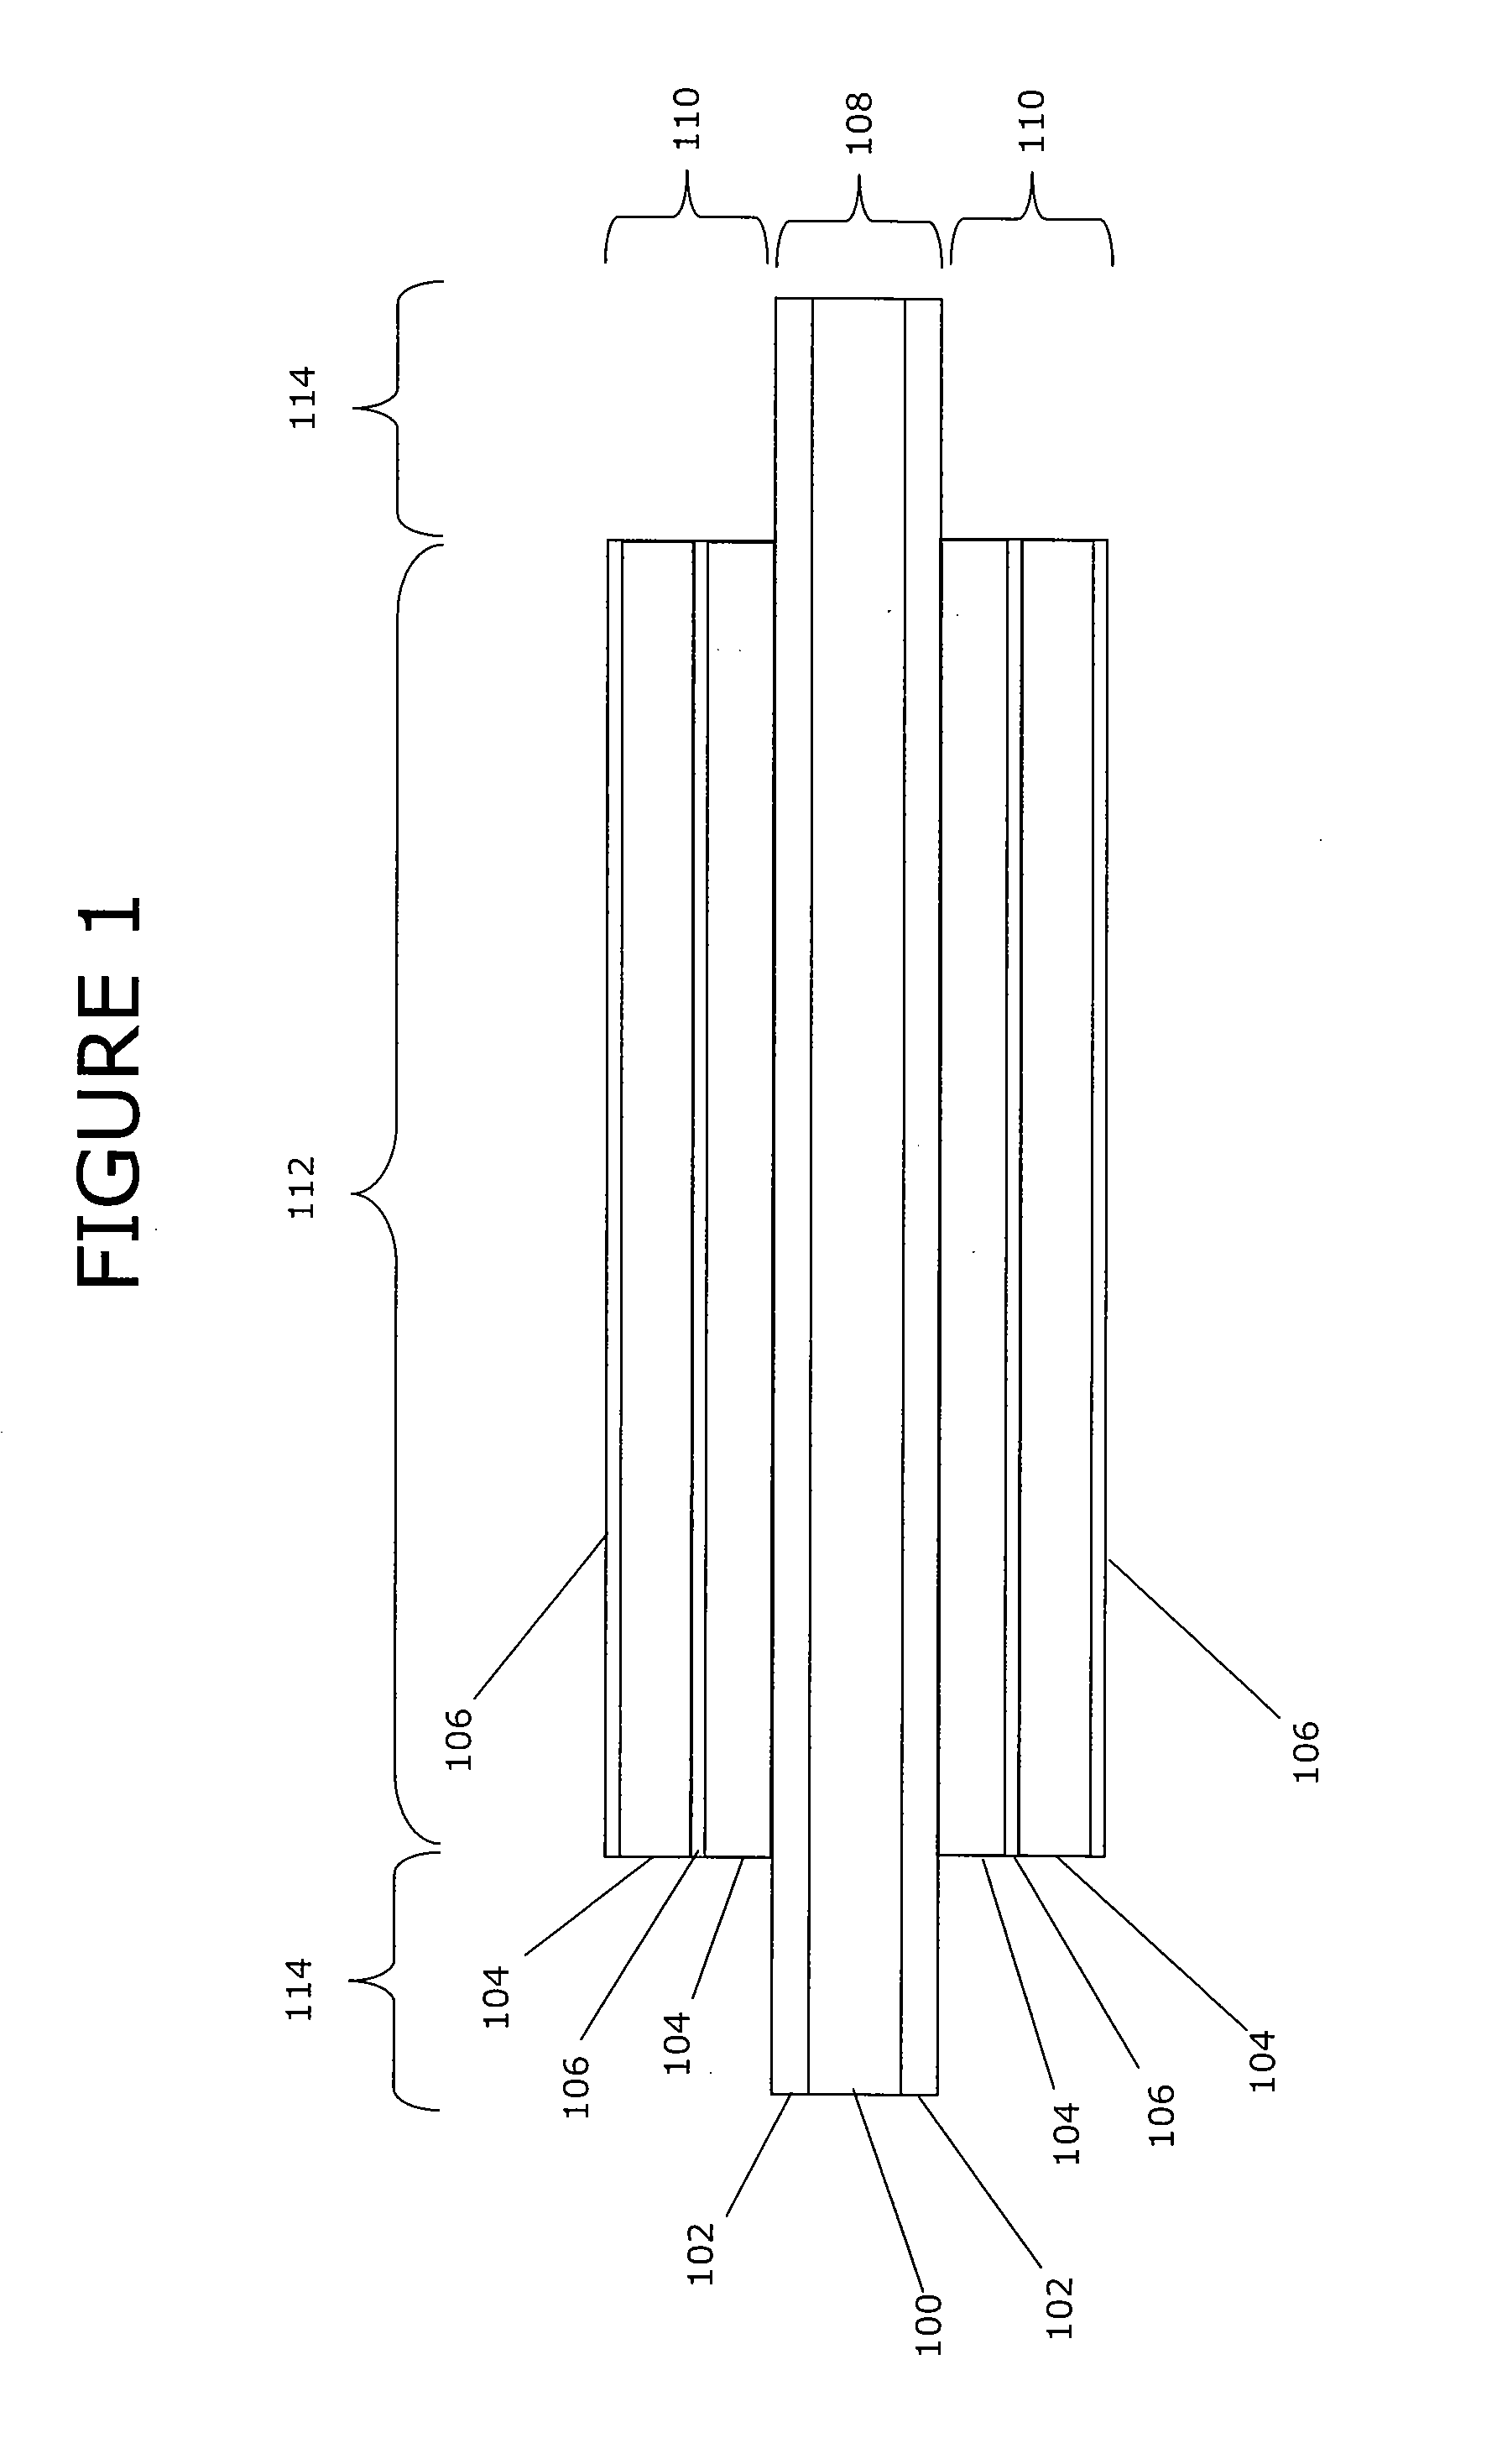 Multilayer, thermally-stabilized substrate structures